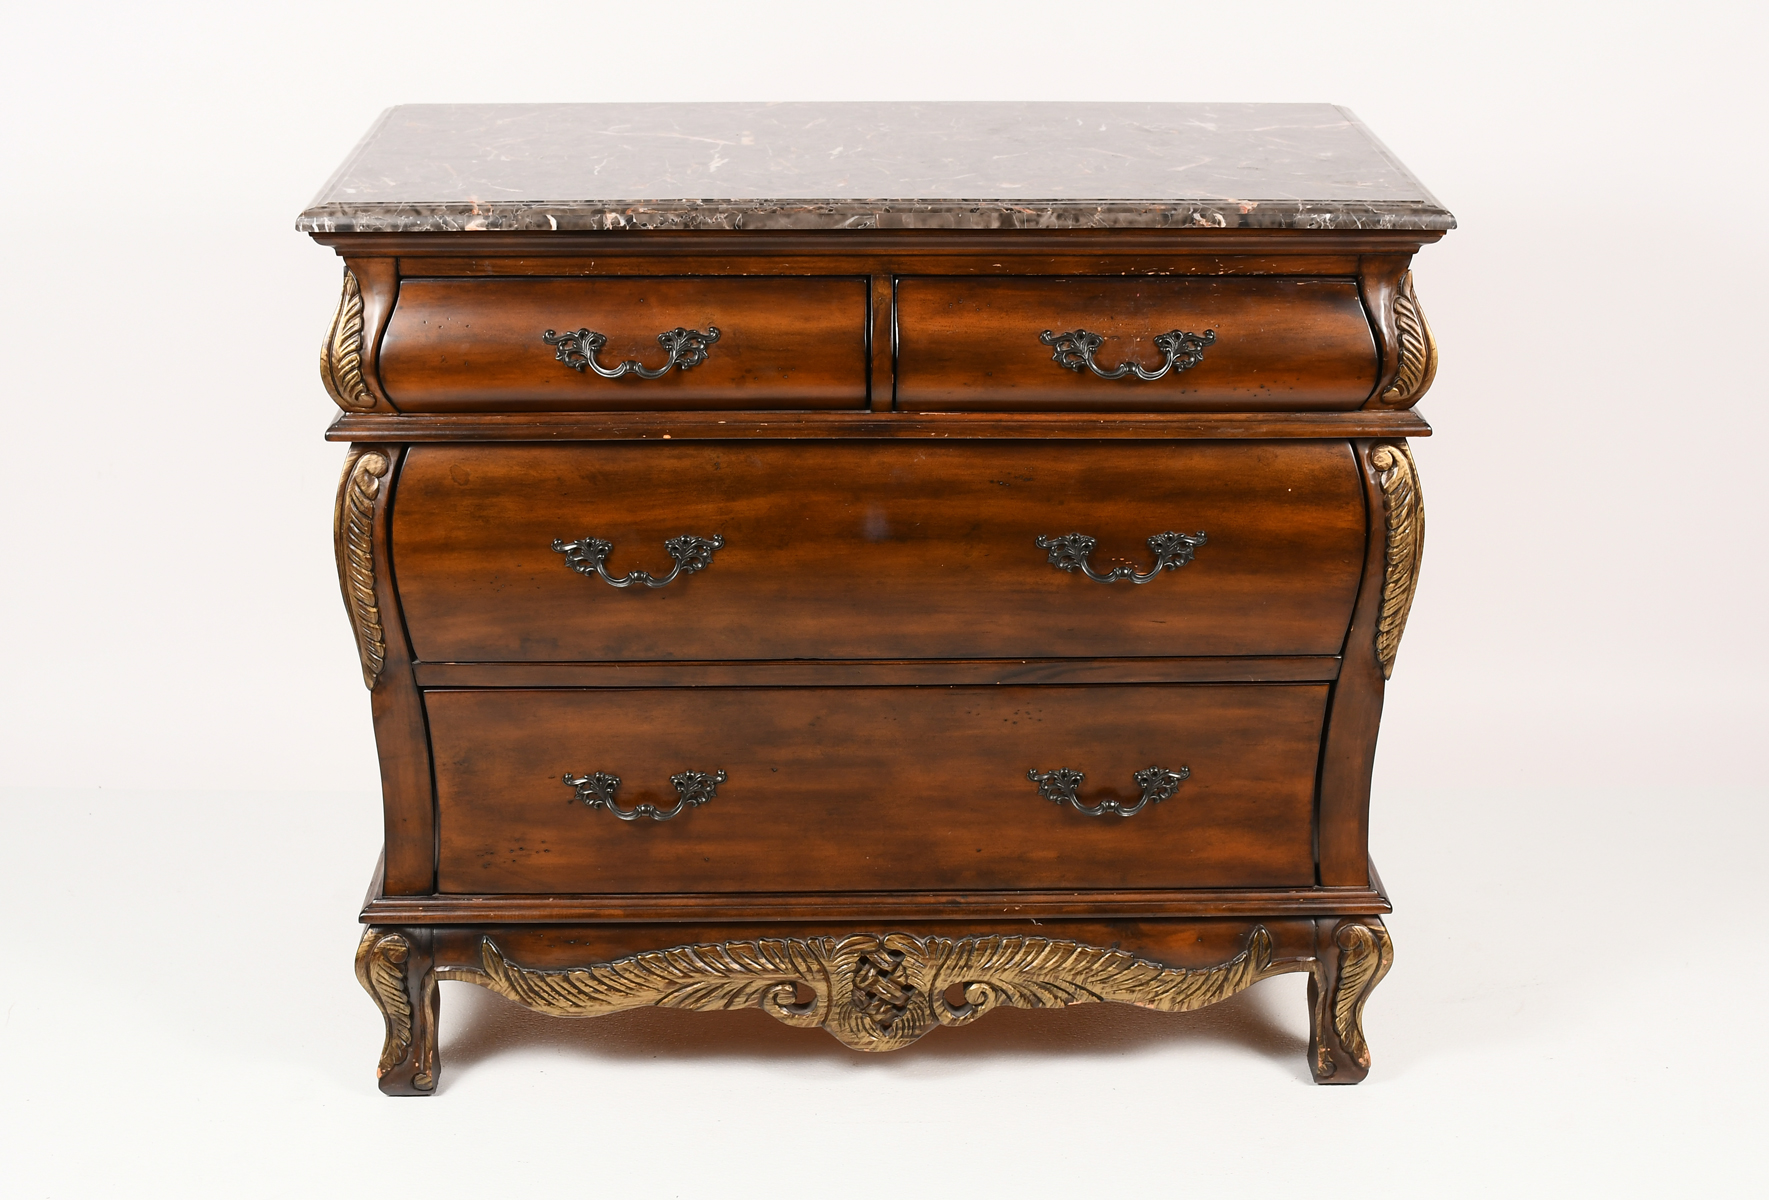 MARBLE TOP 4-DRAWER COMMODE: A